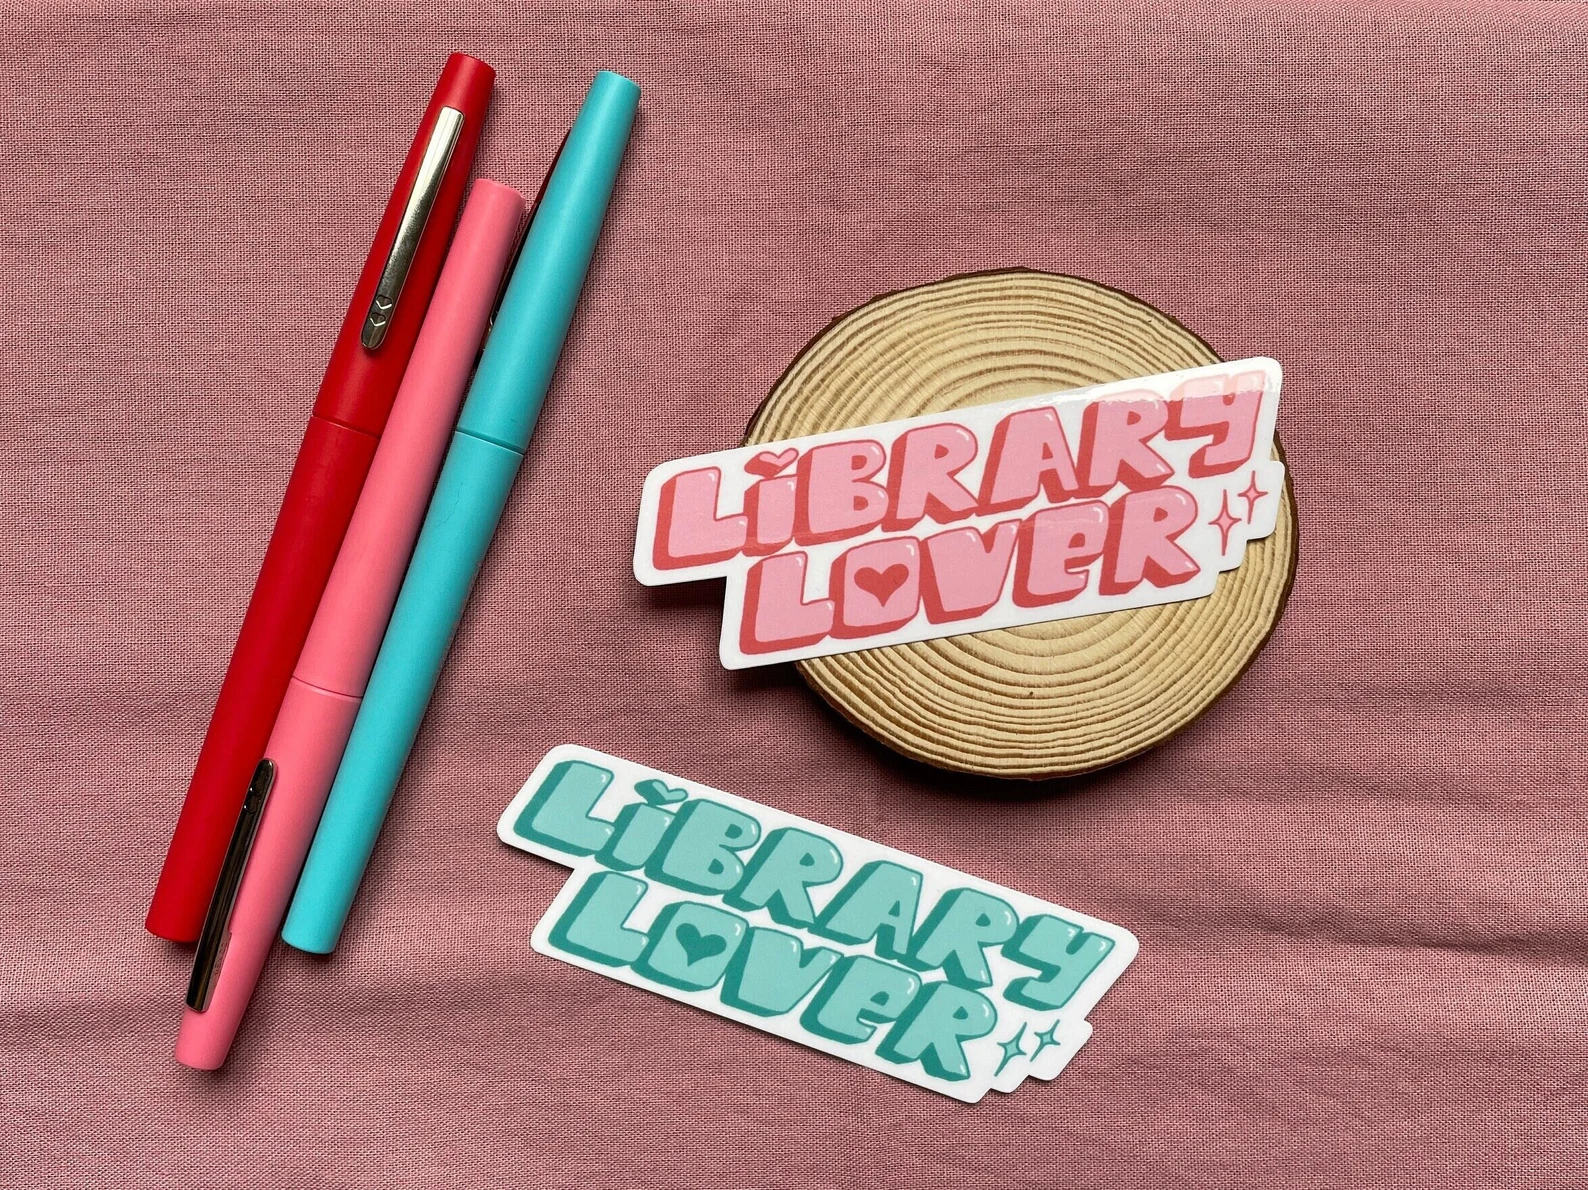 Image of two stickers, one pink and one green, in a retro font that say "library lover."